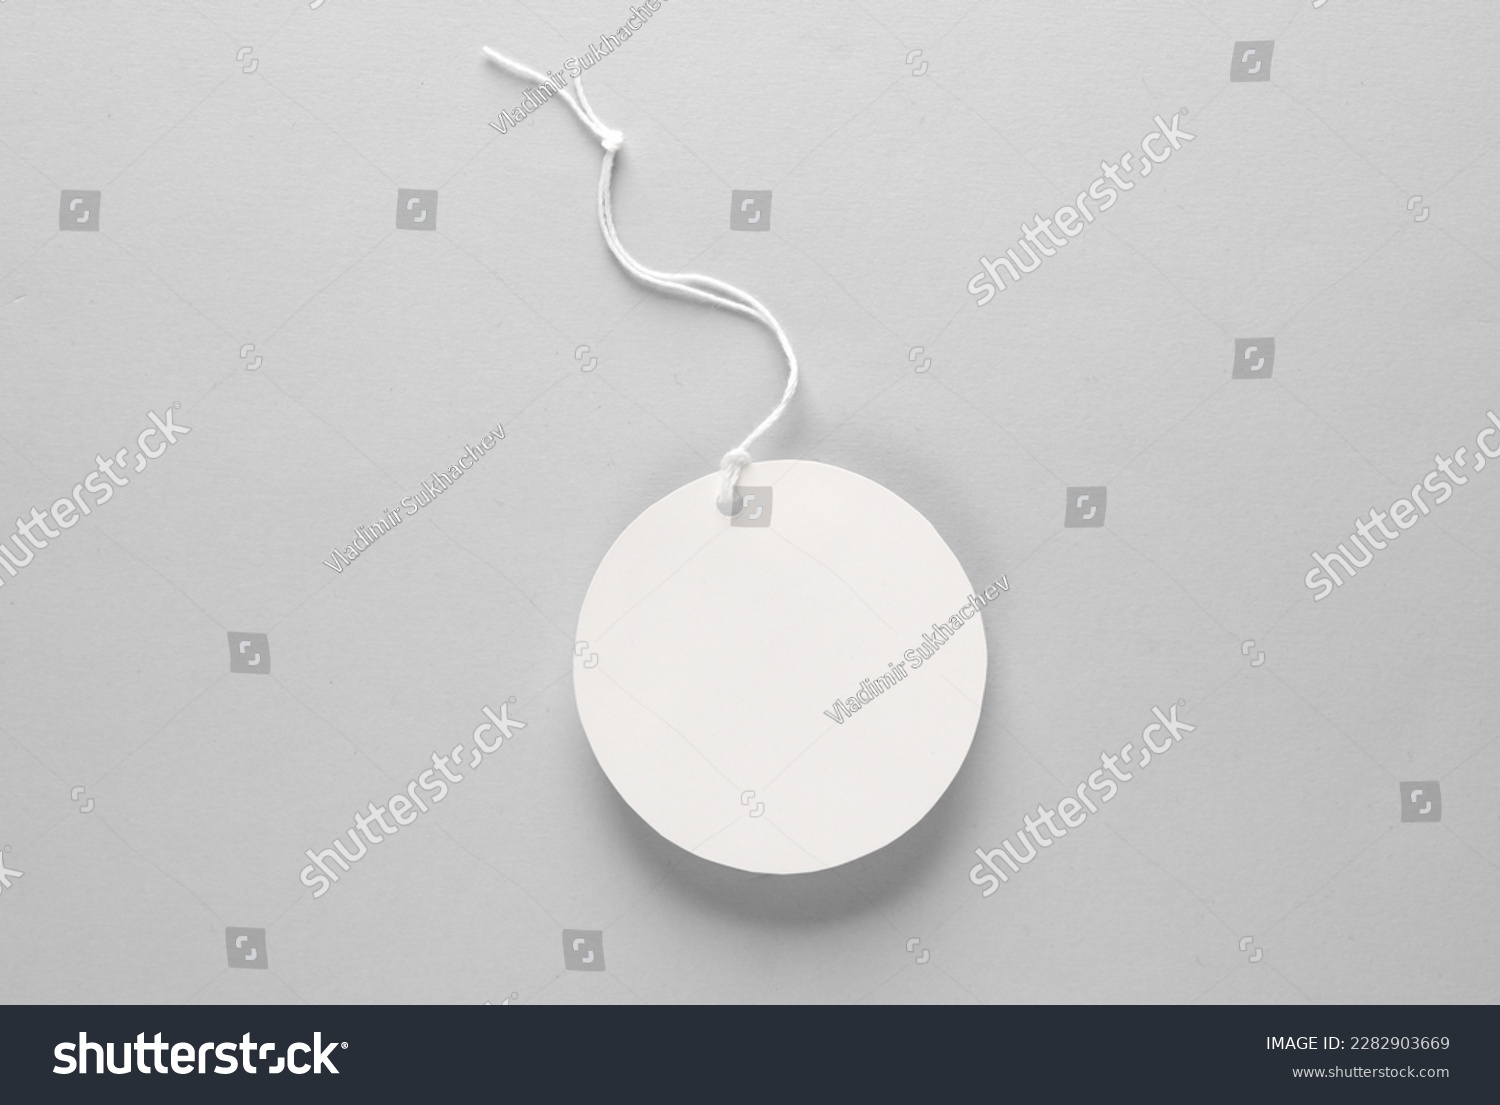 Round empty white price tag with string on gray background. Template for design #2282903669